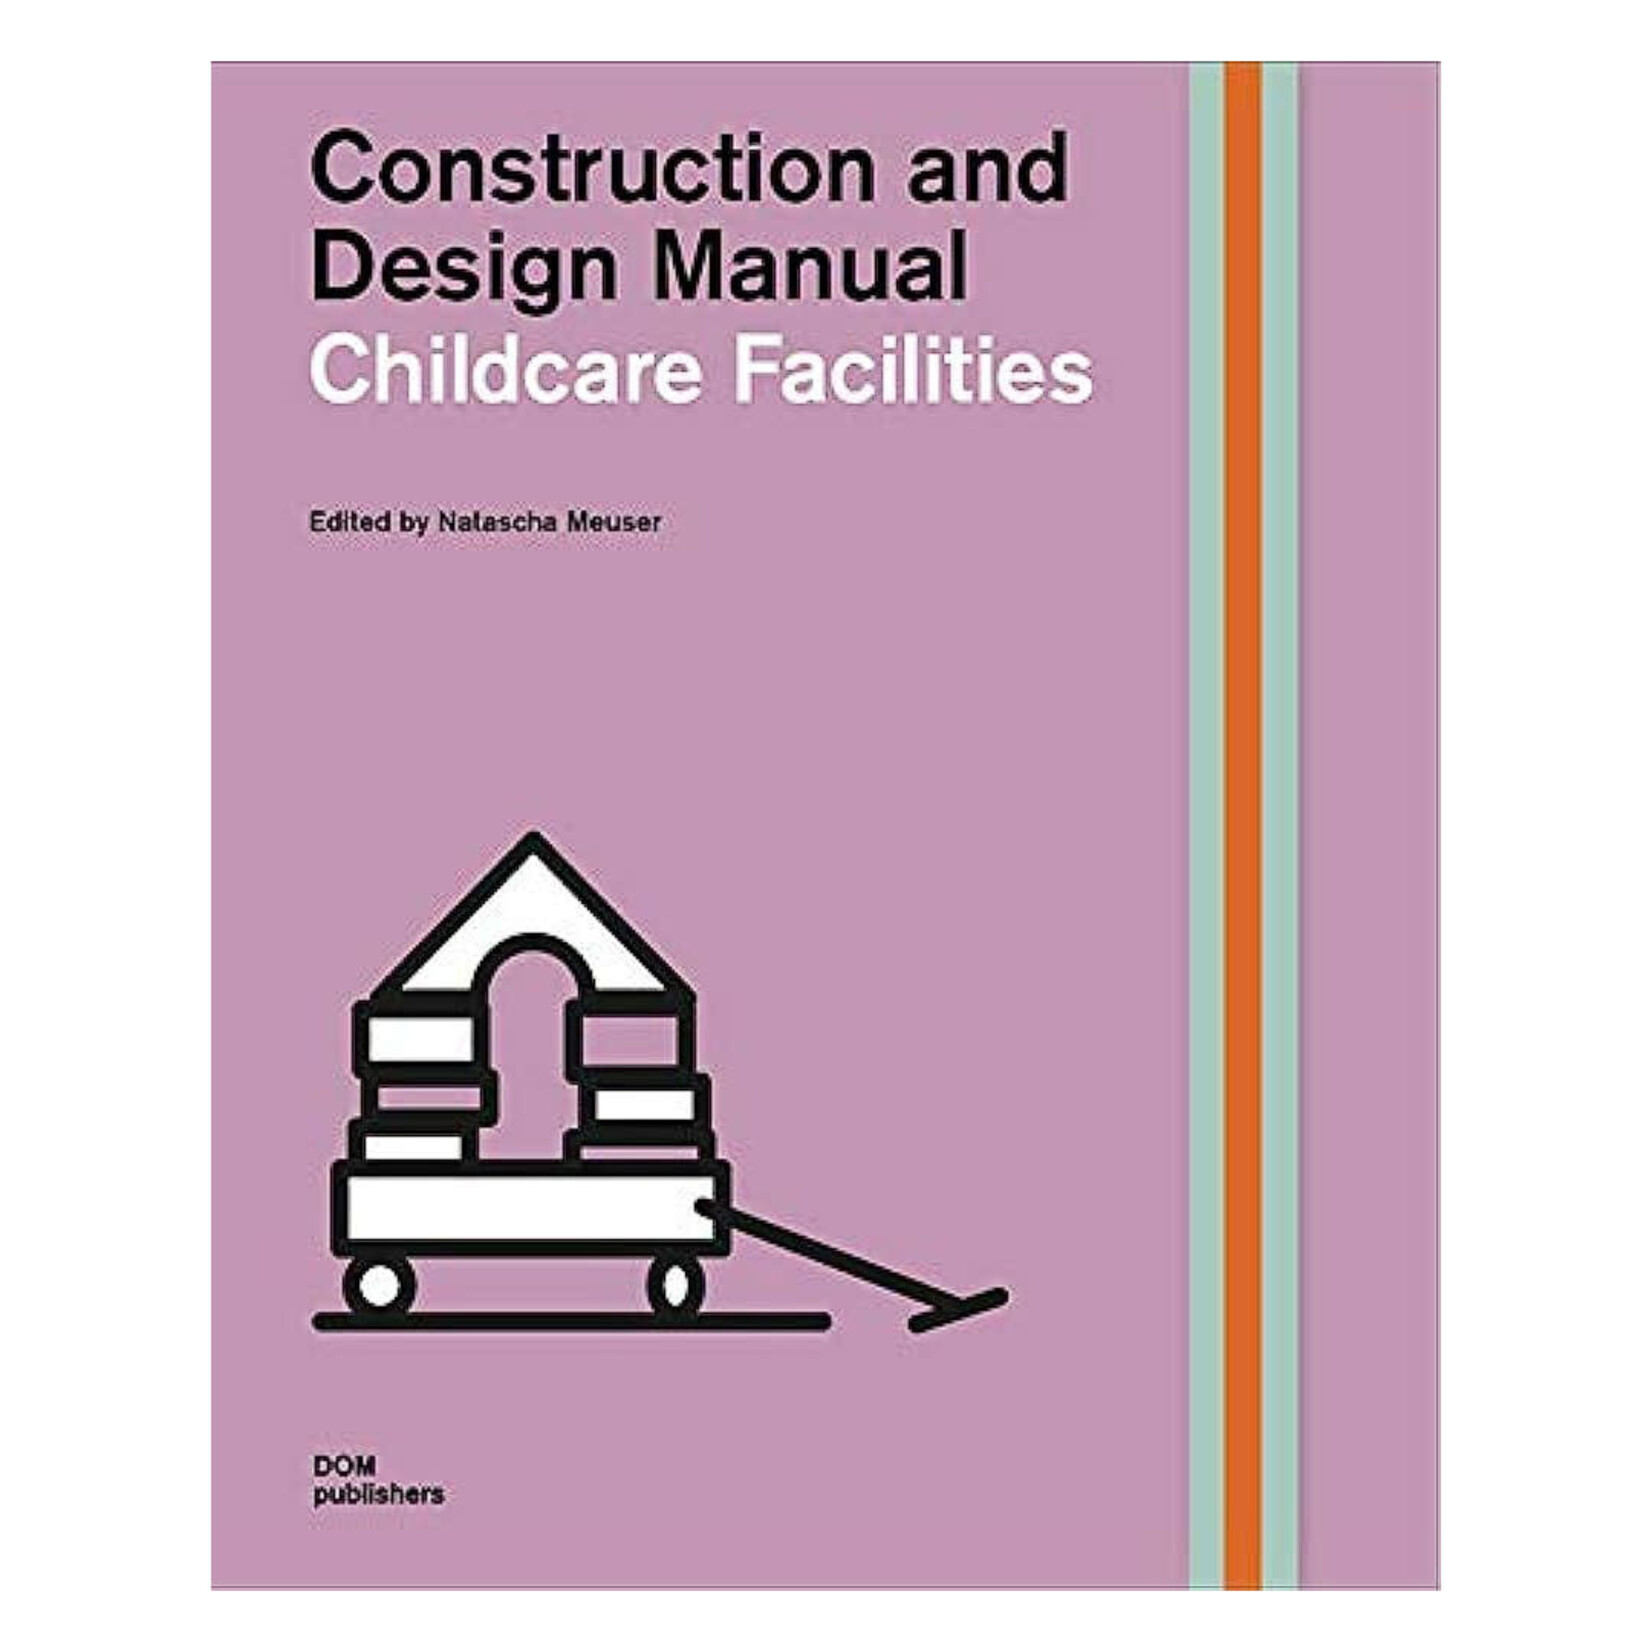 Construction and Design Manual: Childcare Facilities